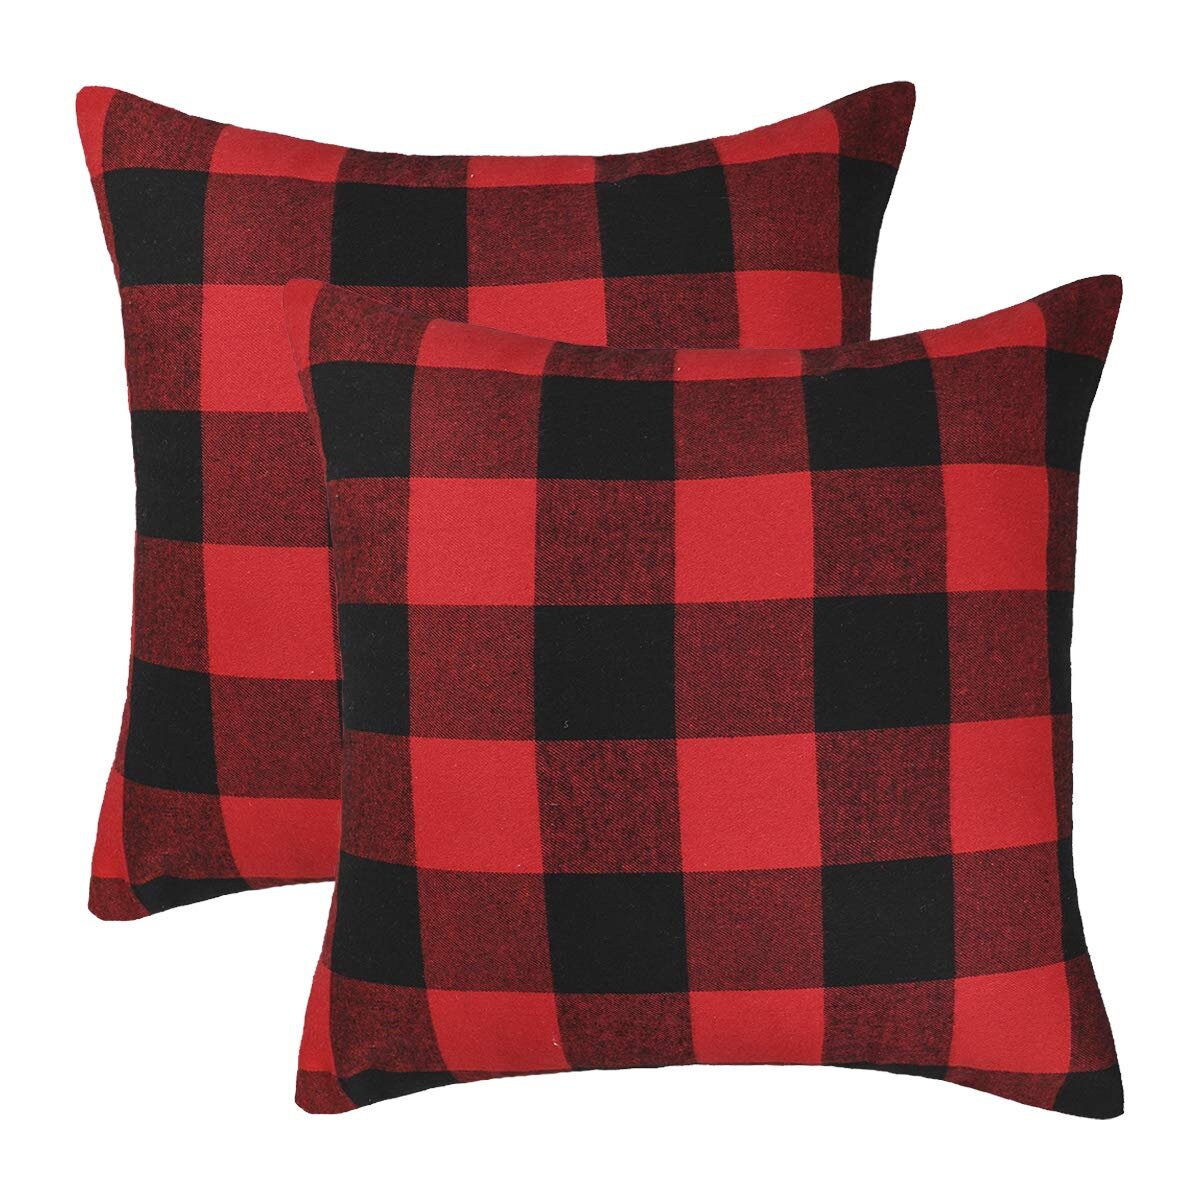 red and black check pillows.jpg